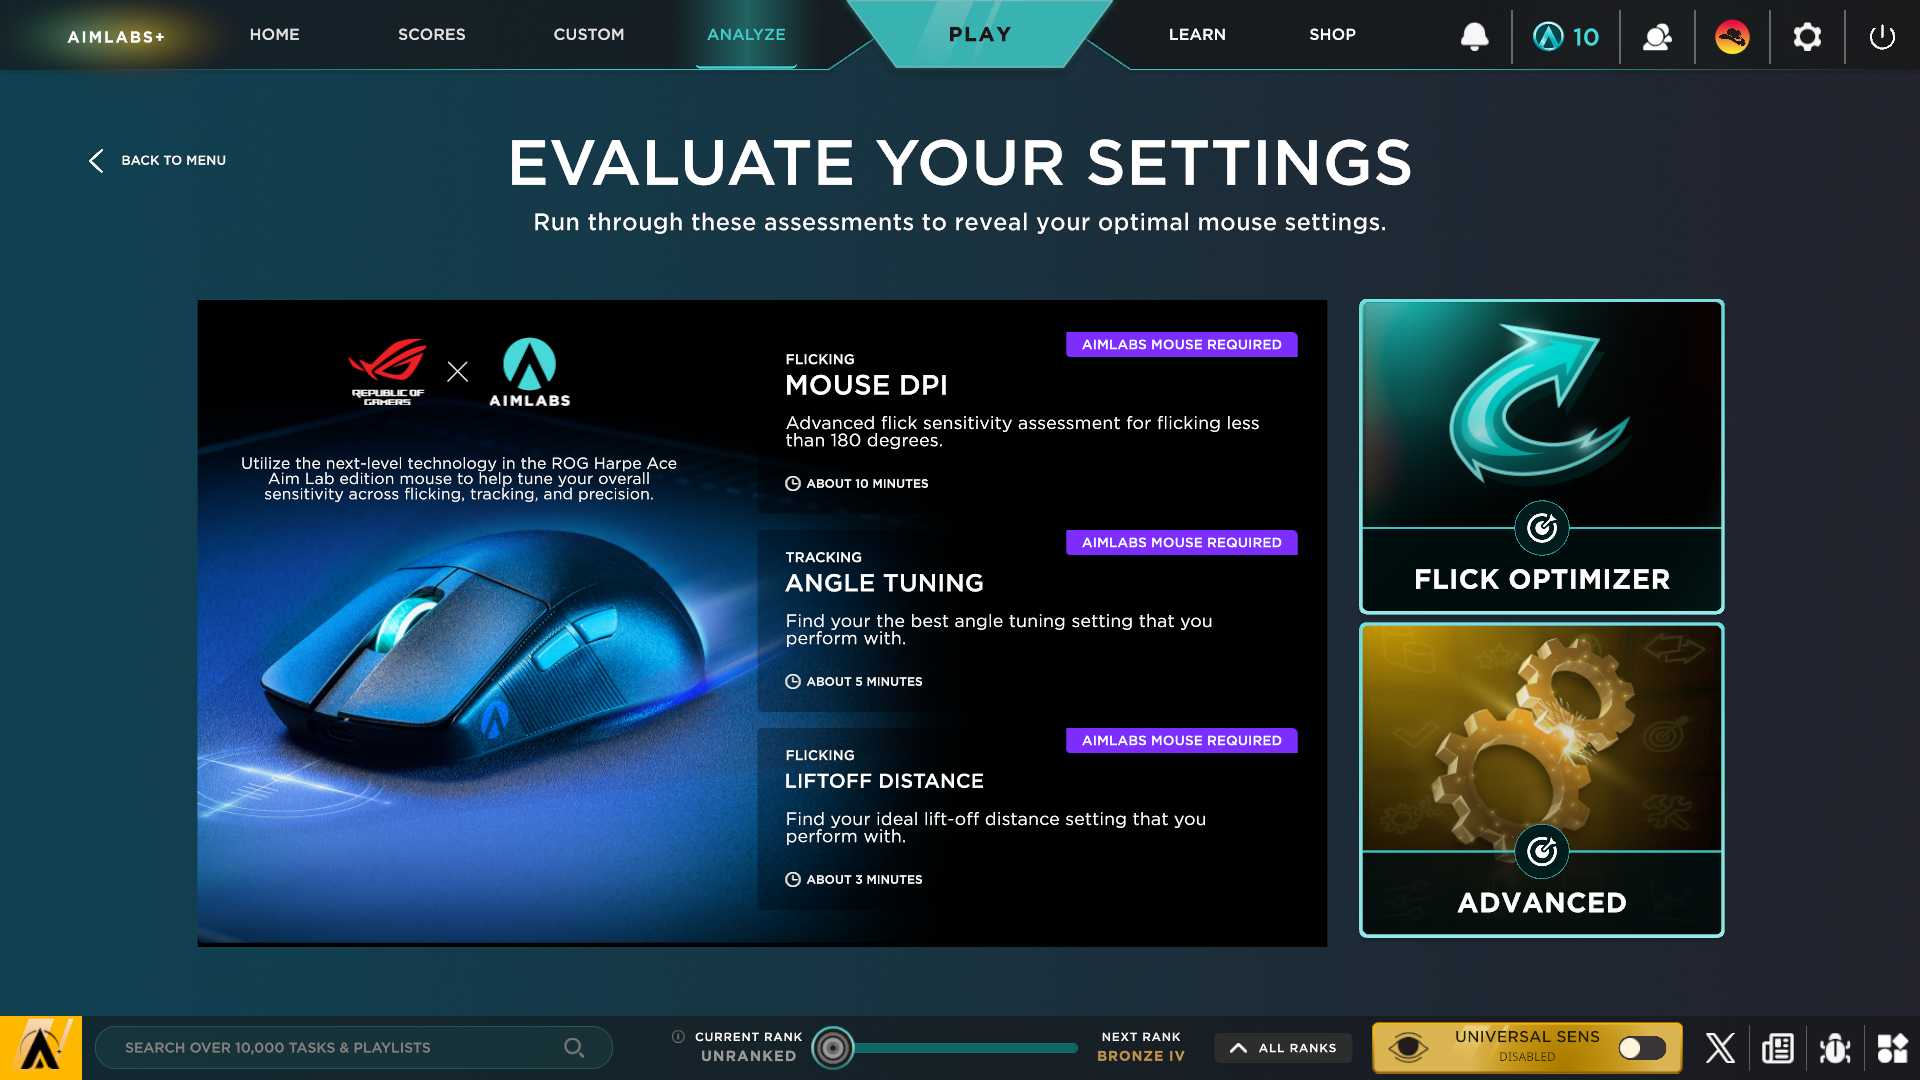 Aimlabs' "Analyze" page showcasing their sensitivity assessment options.